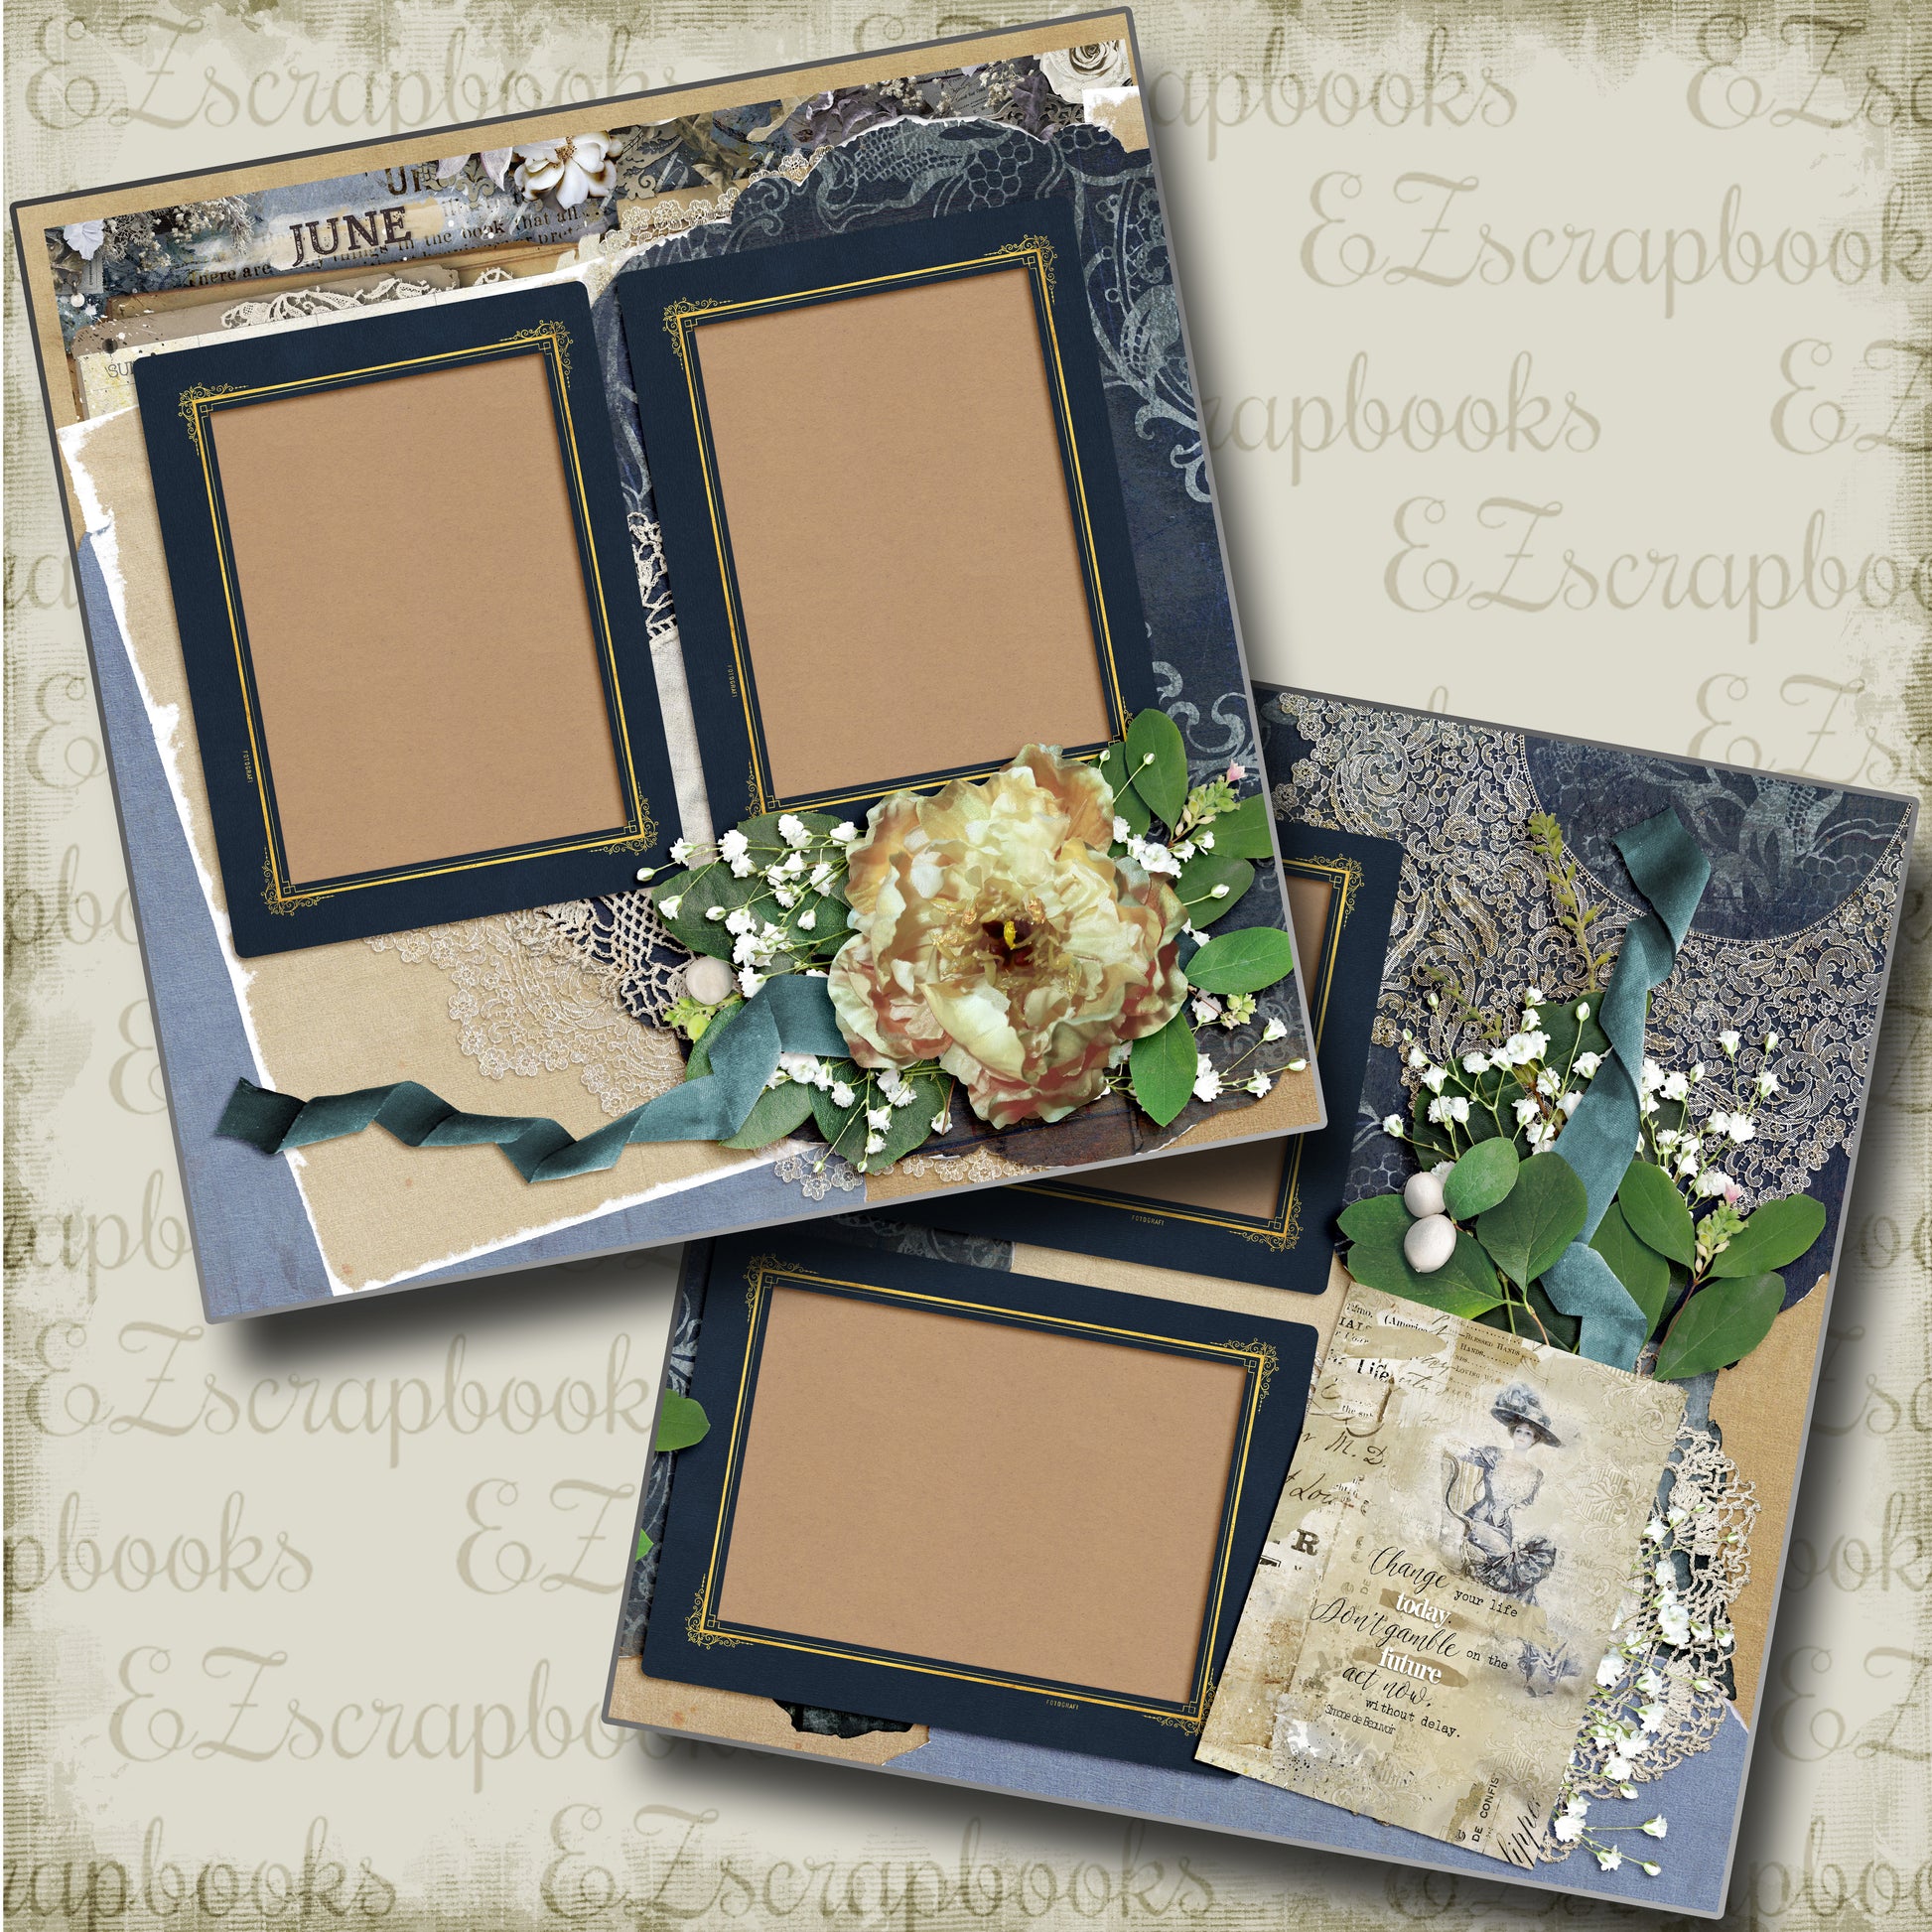 Shabby Calendar Months of the Year Pack - 1431 - EZscrapbooks Scrapbook Layouts Months of the Year